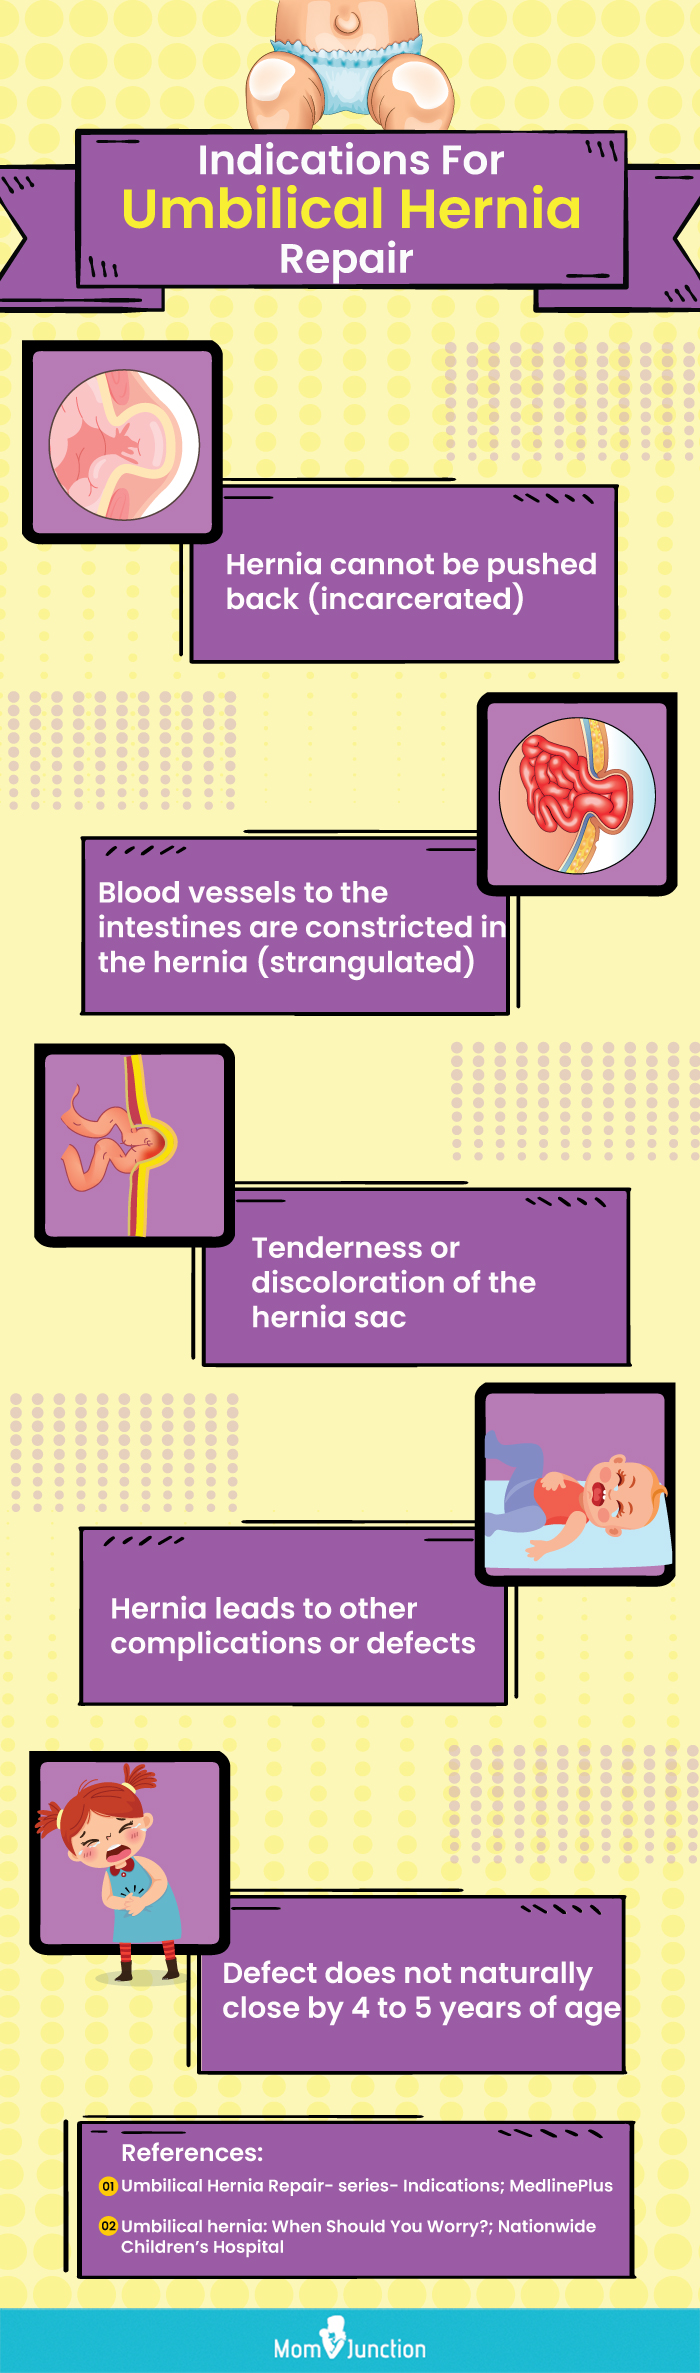 indications for umbilical hernia repair (infographic)